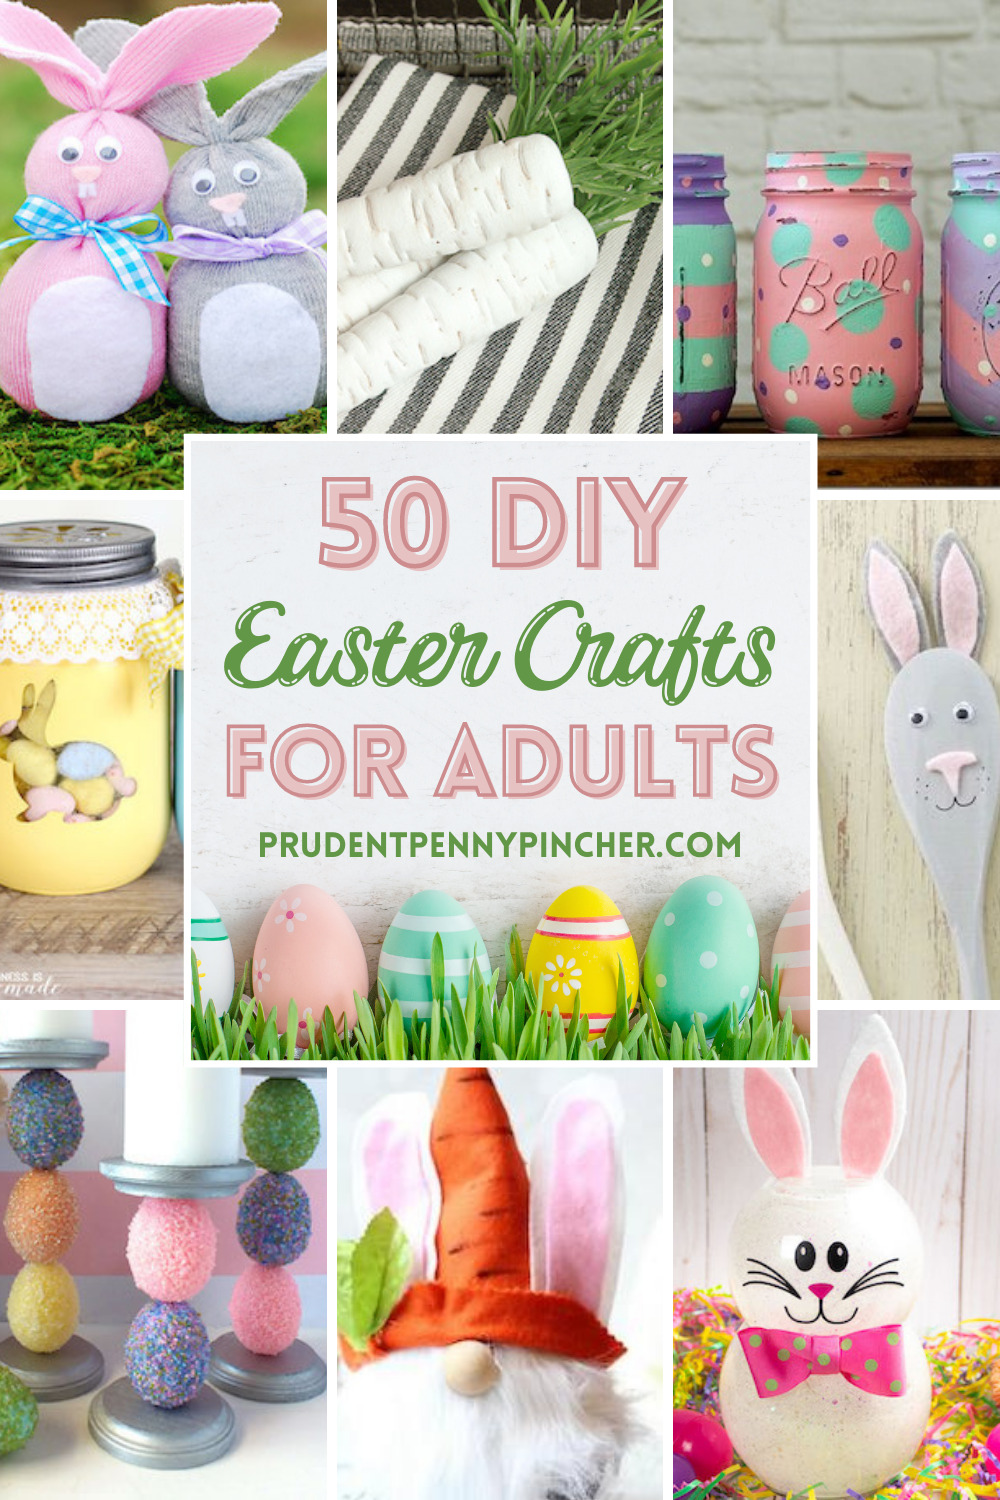 60-diy-easter-crafts-for-adults-prudent-penny-pincher